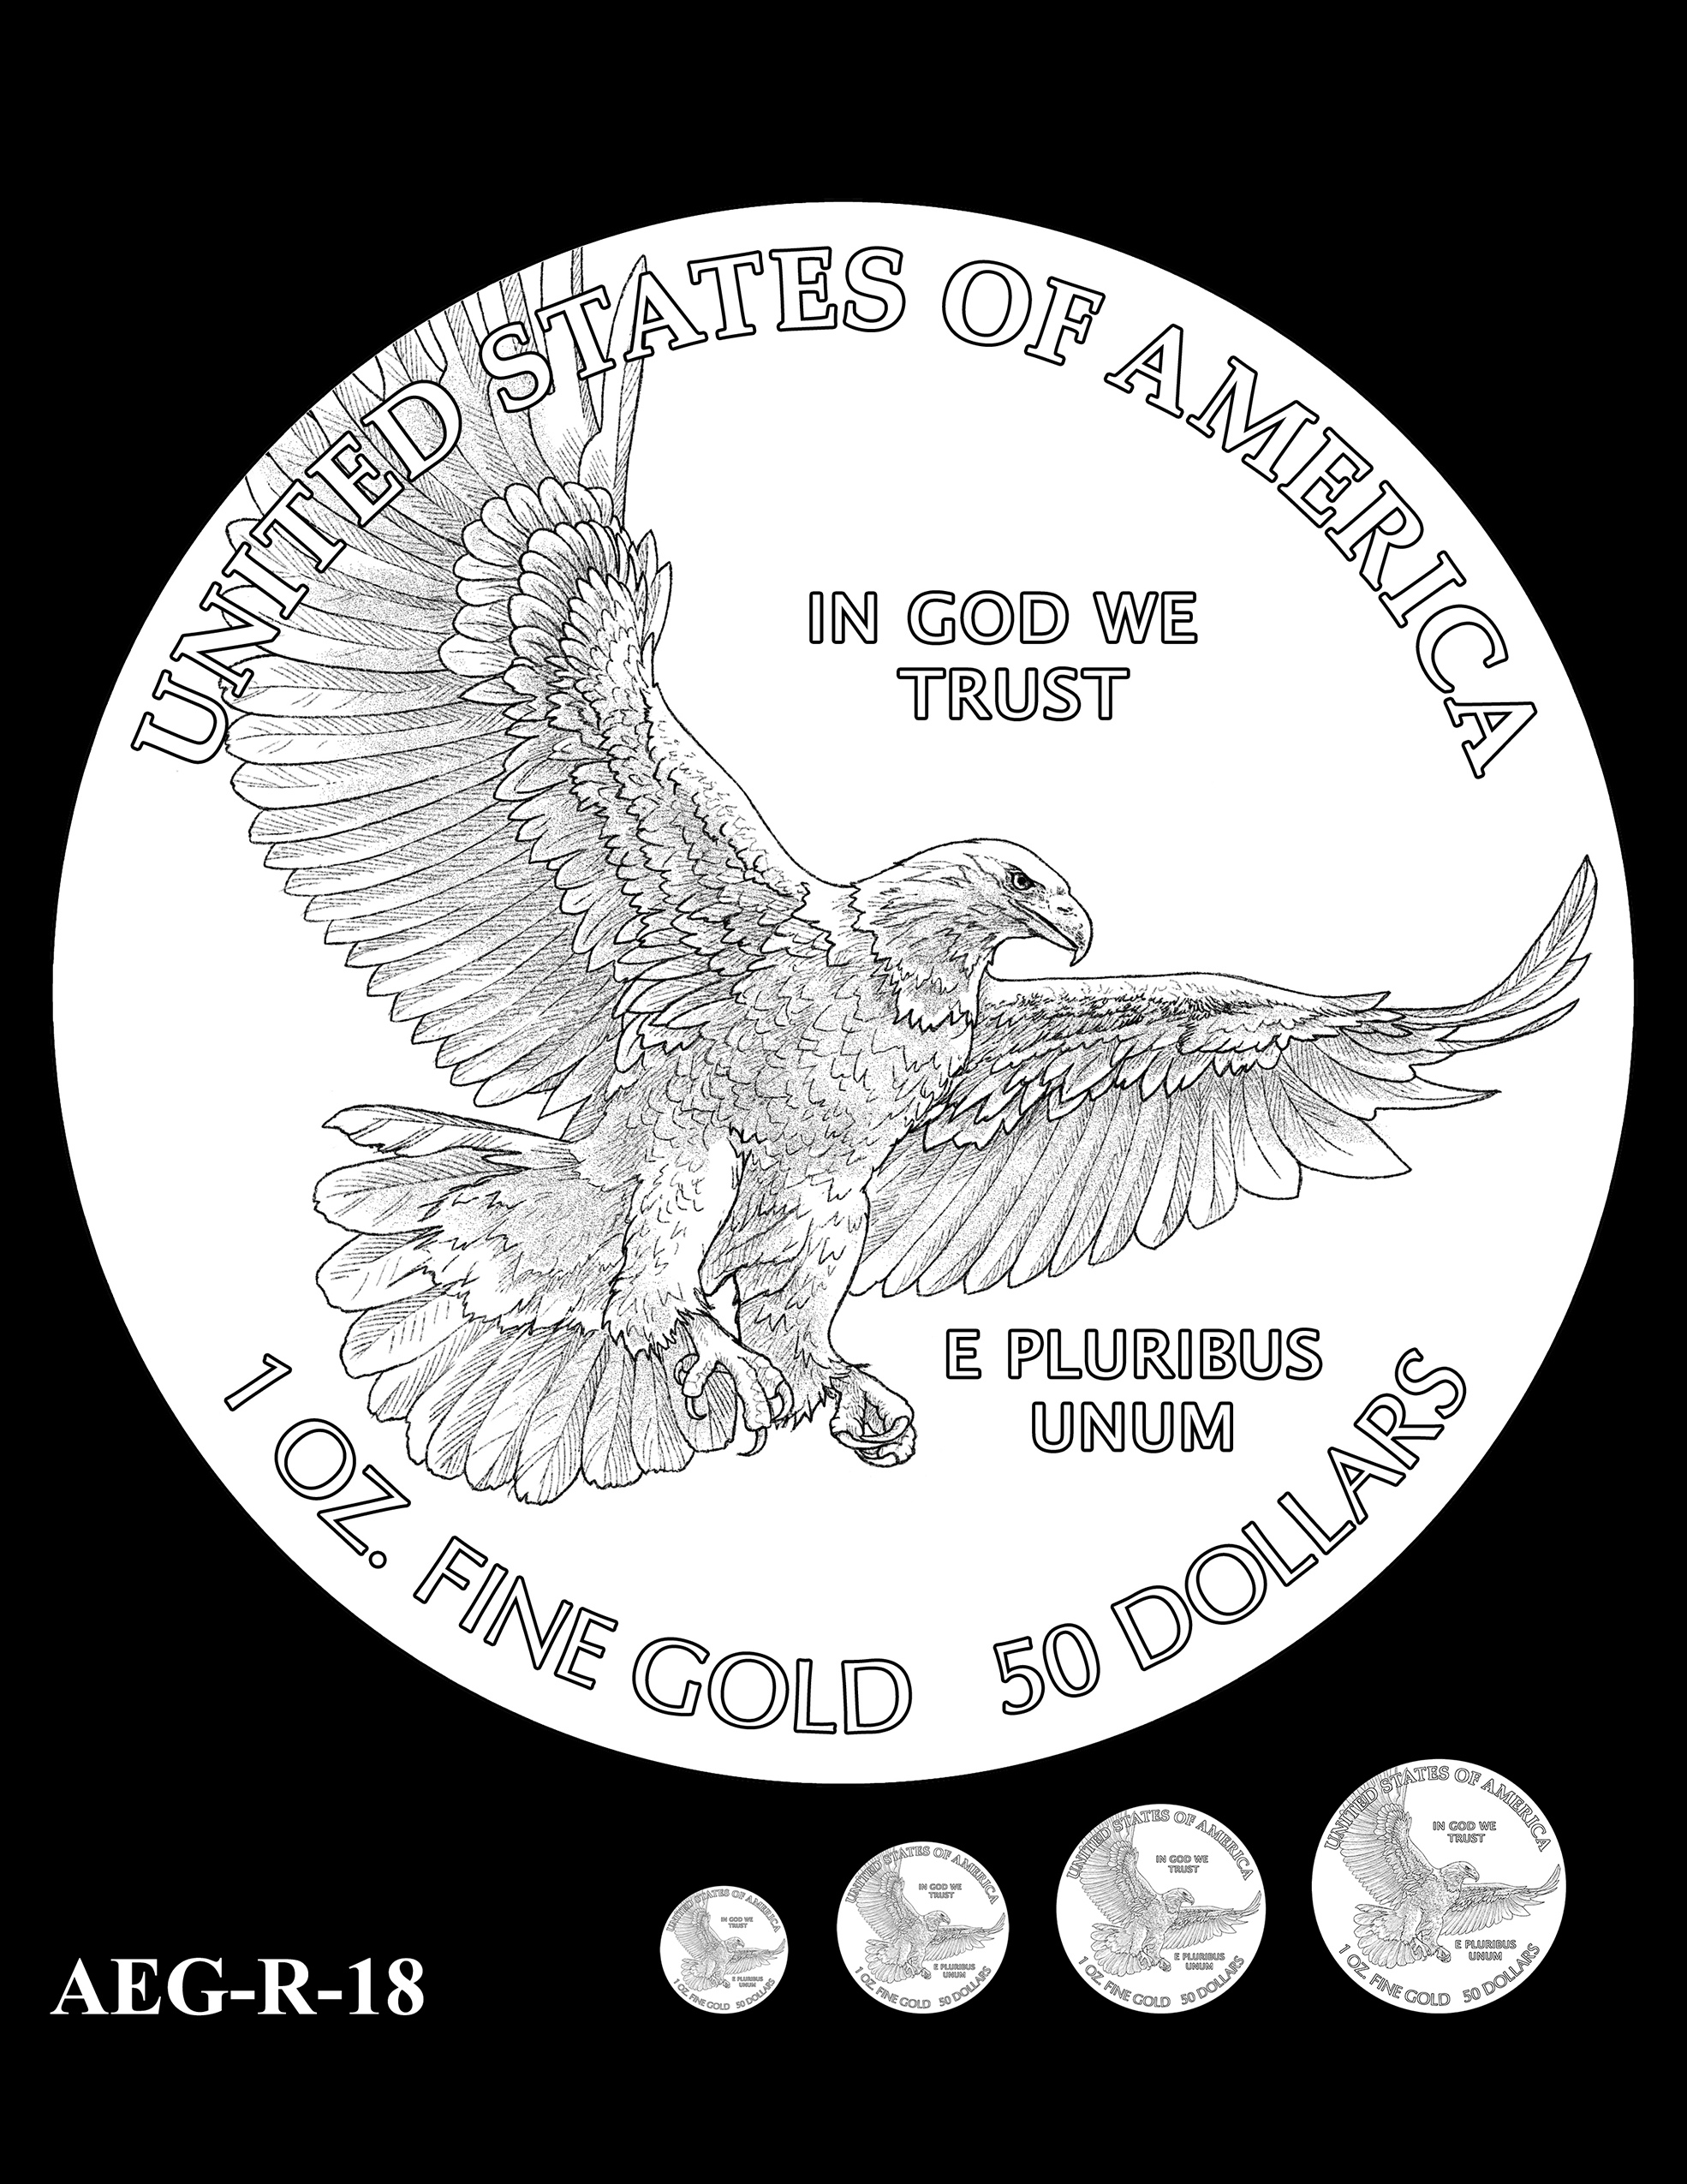 AEG-R-18 -- American Eagle Proof and Bullion Gold Coin - Reverse